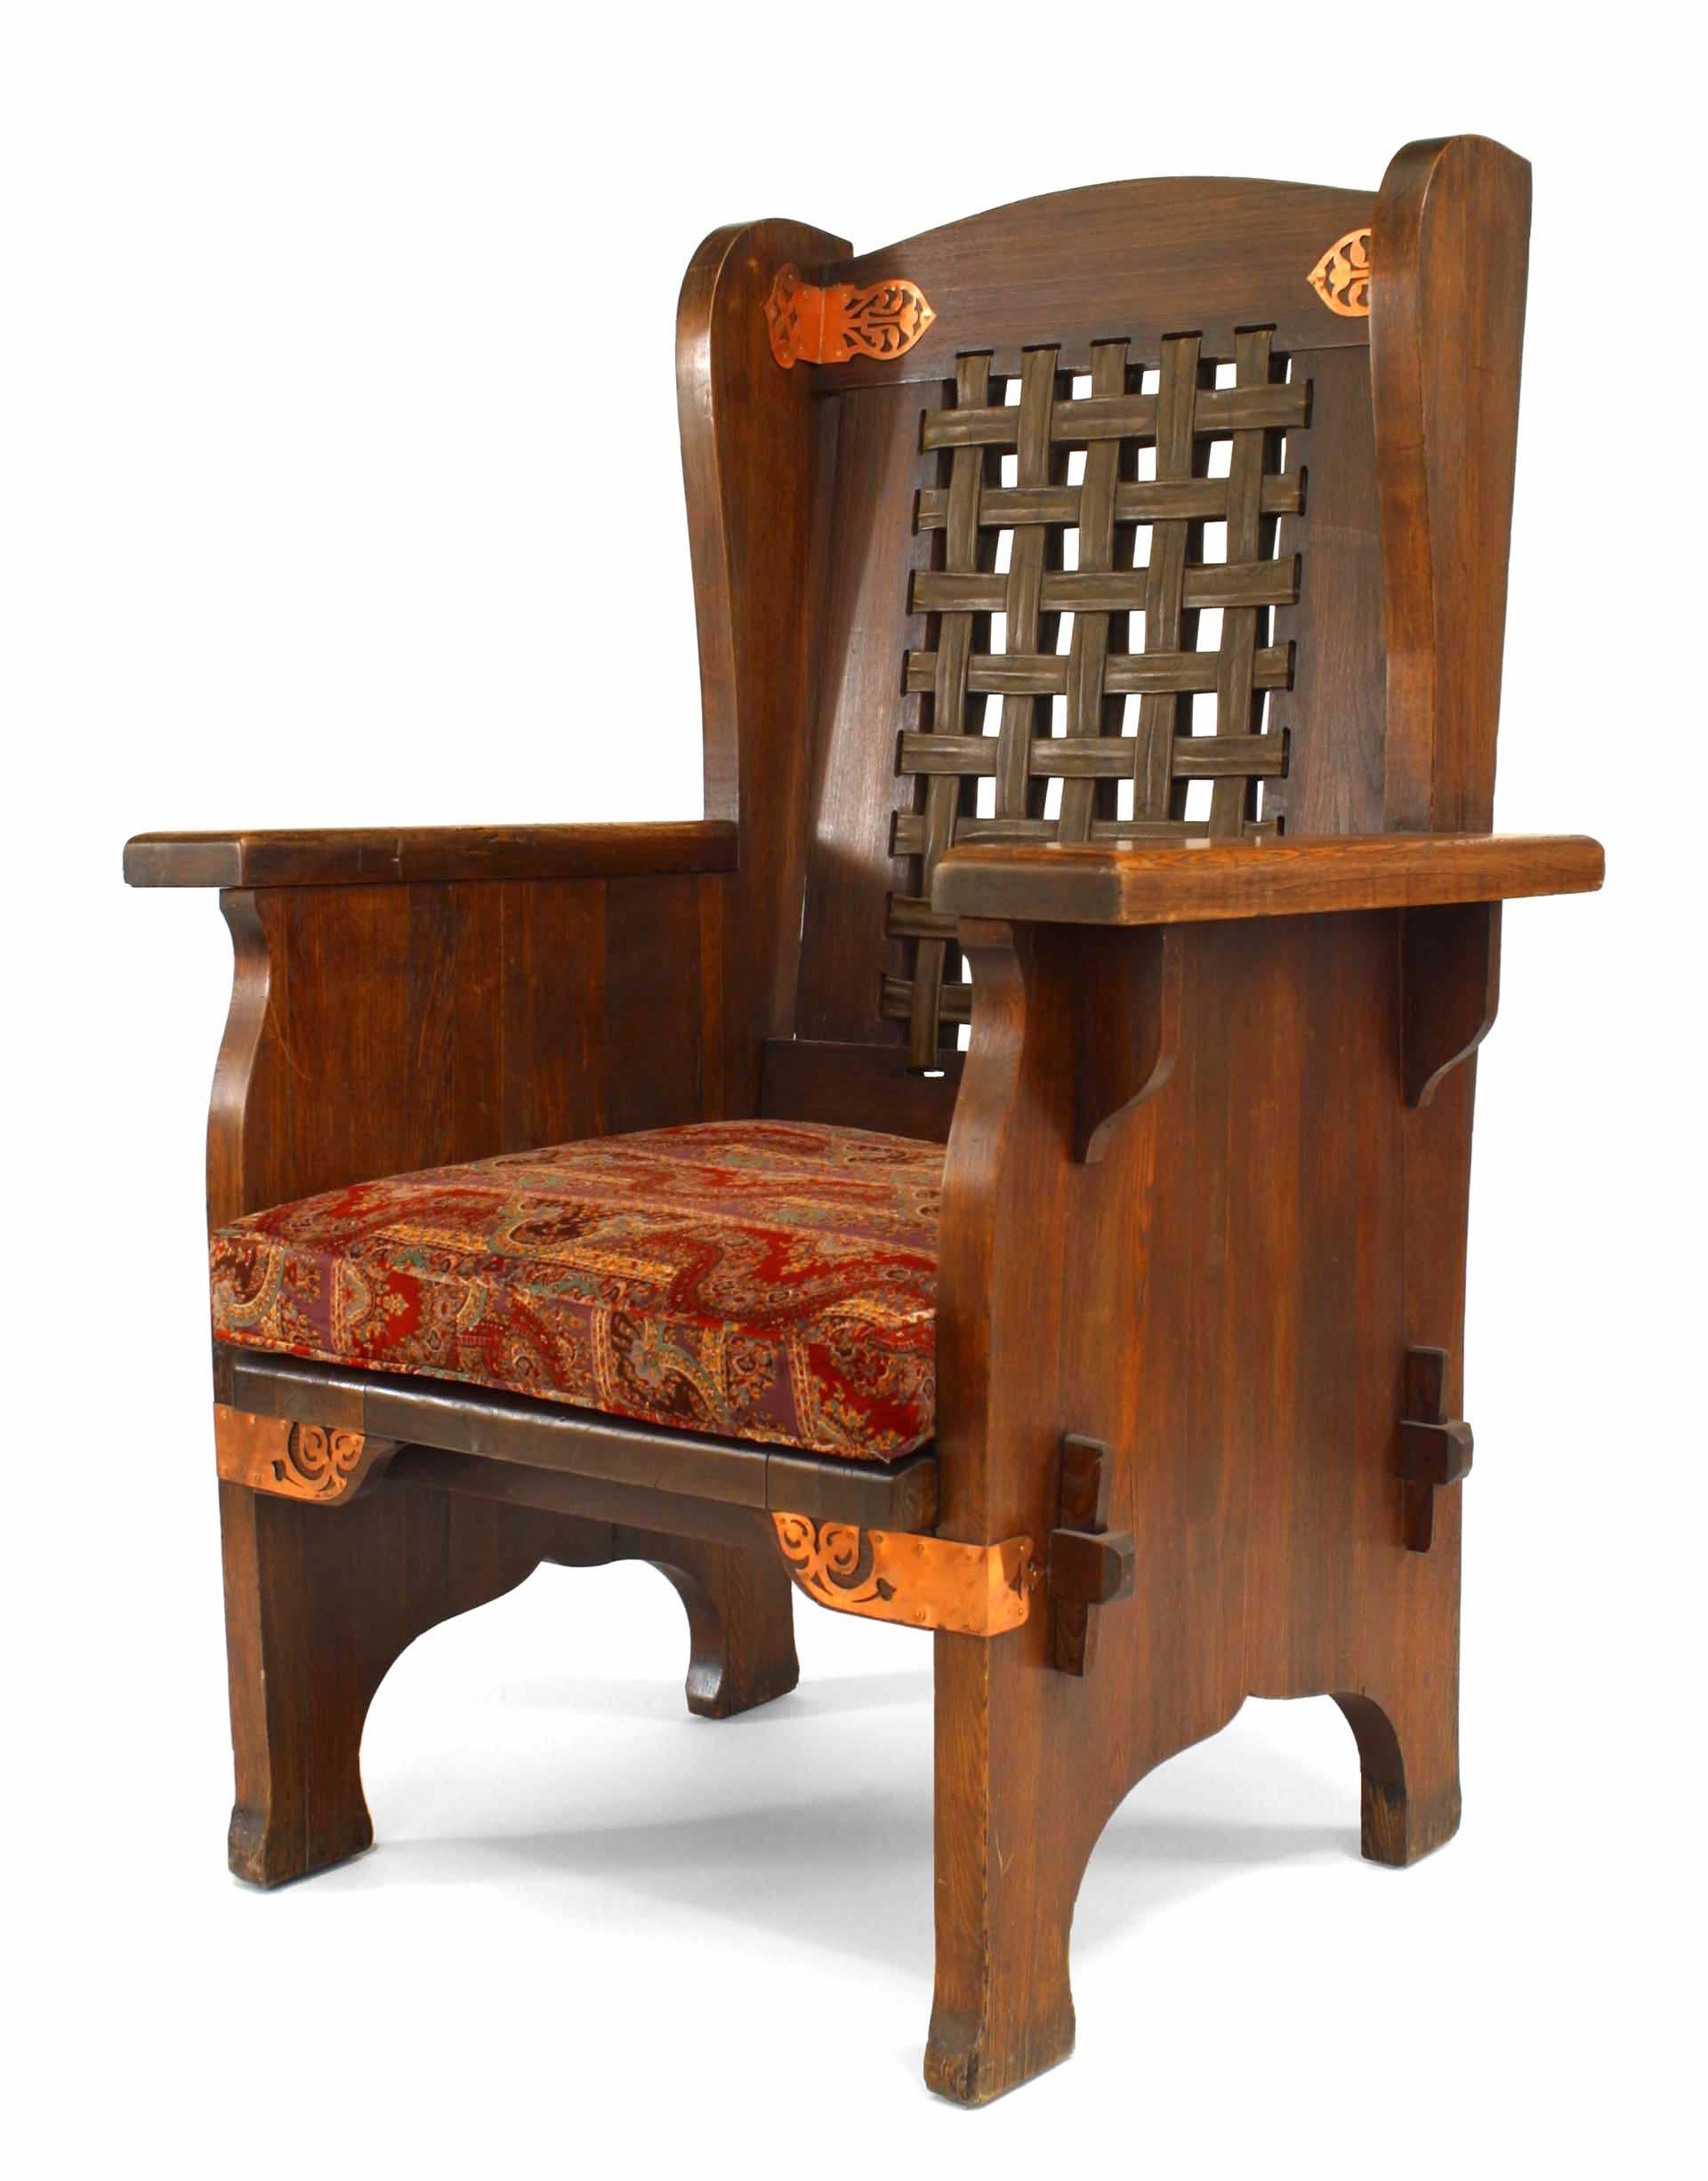 American Mission stained oak wing chair with decorative copper trim and leather mesh back with paisley seat cushion (Dexter Furniture Co., Black River).
   